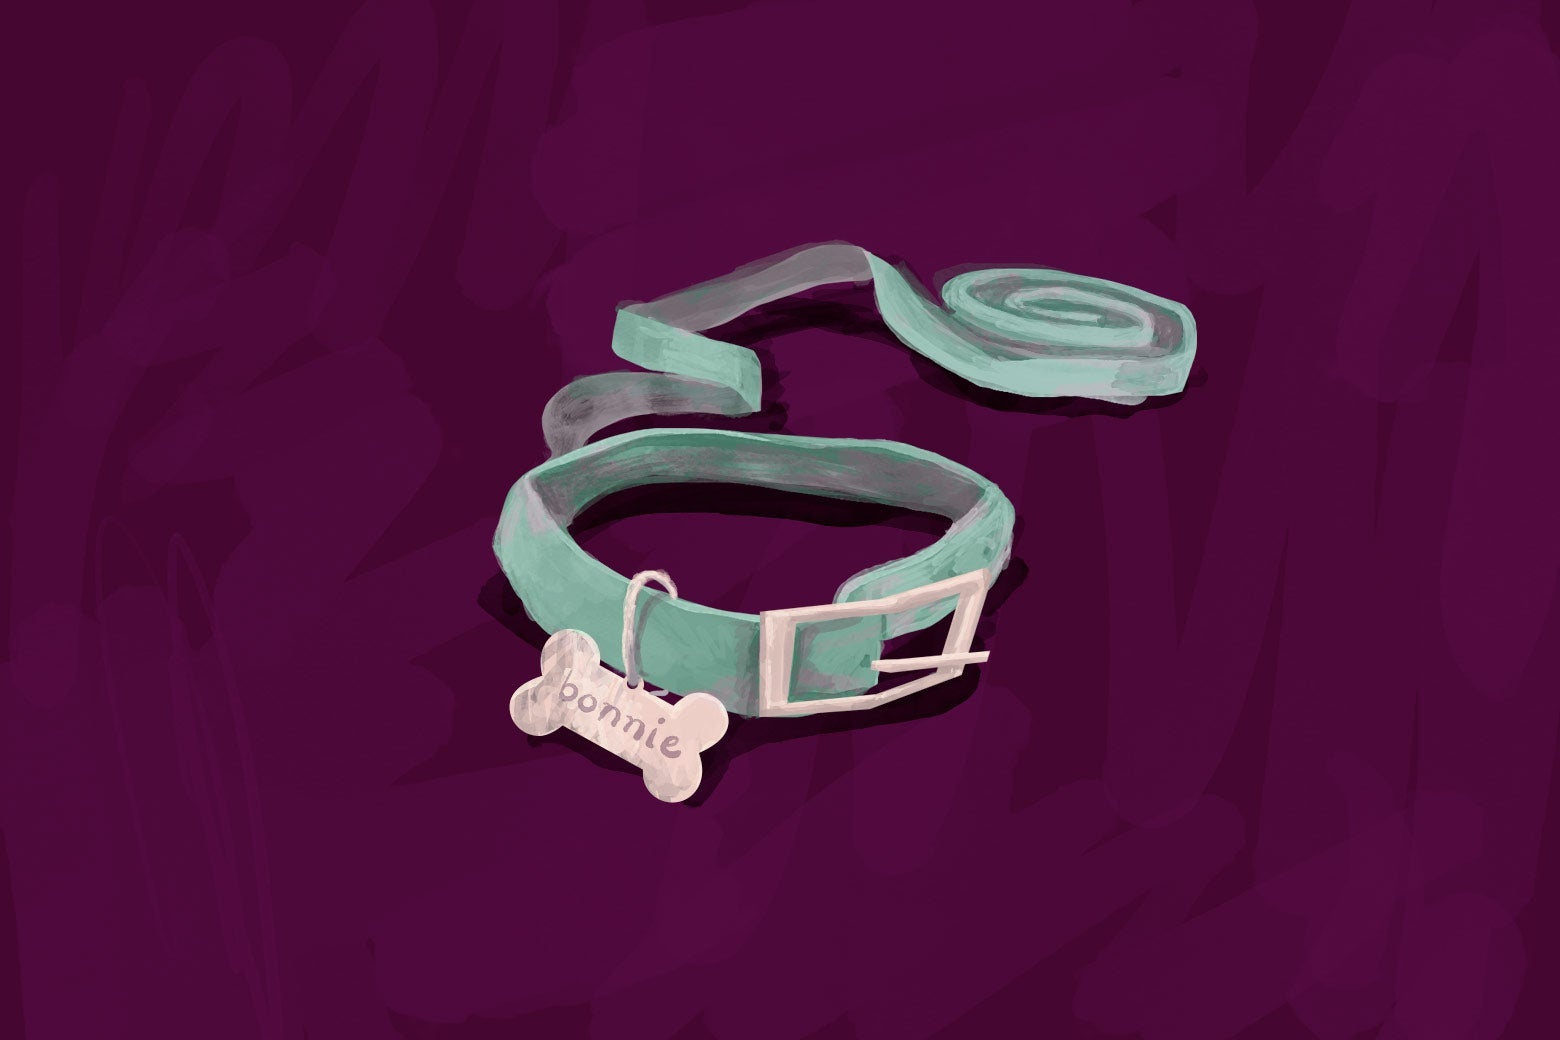 An illustration of a green leash with a tag that says "Bonnie" on it.